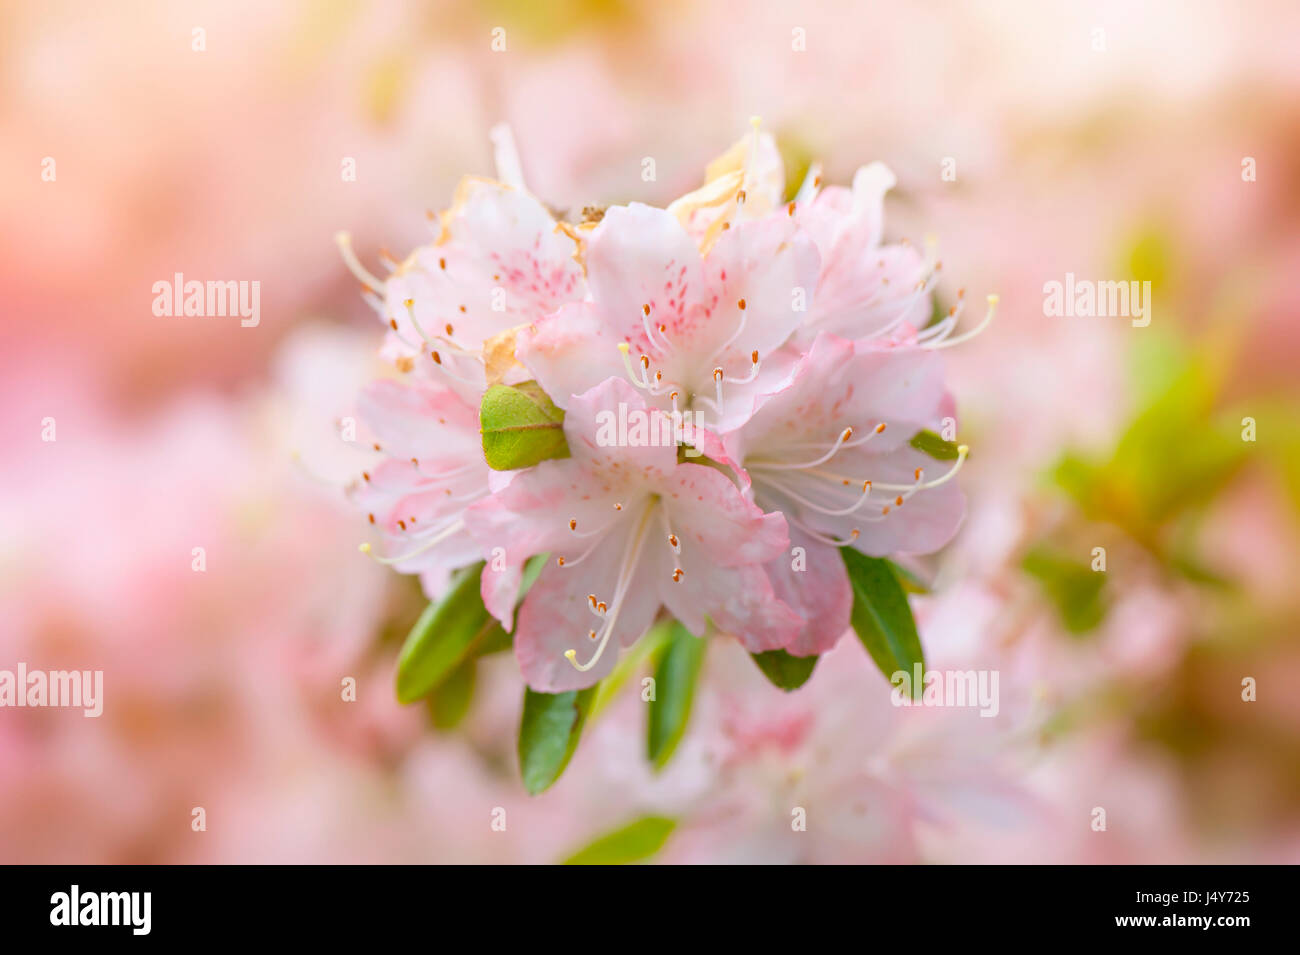 Close-up image of the beautiful, spring flowering, pale pink Azalea flowerhead, image taken against a soft light background. Stock Photo